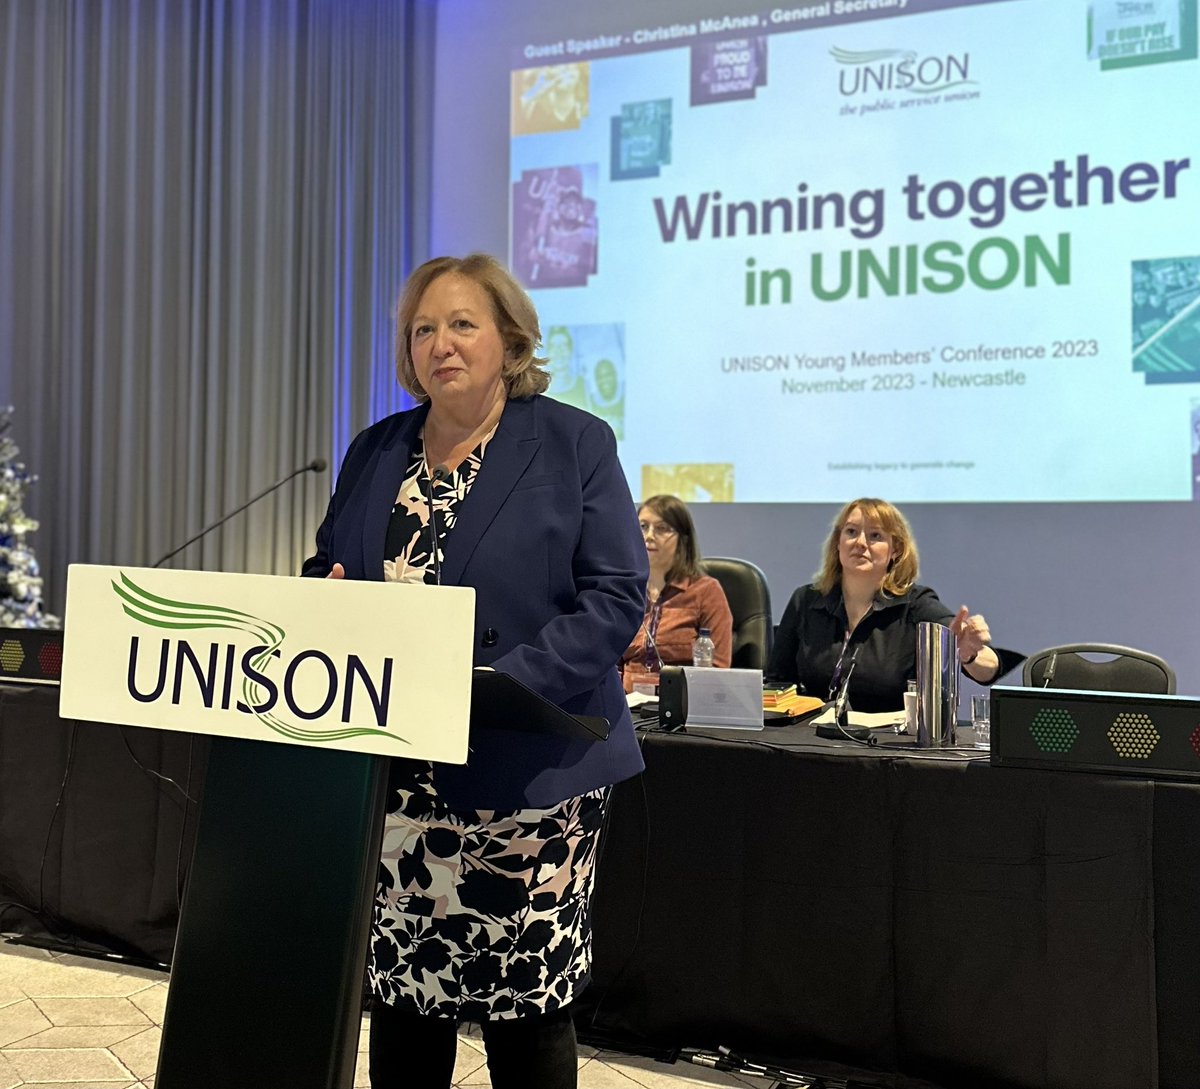 Being young today,  is so much harder.     But I am constantly in awe of the resilience, creativity & dynamism of young workers today.  I’ve been honoured to meet so many young members and to help give them the prominence they deserve within UNISON.    #UYMC23